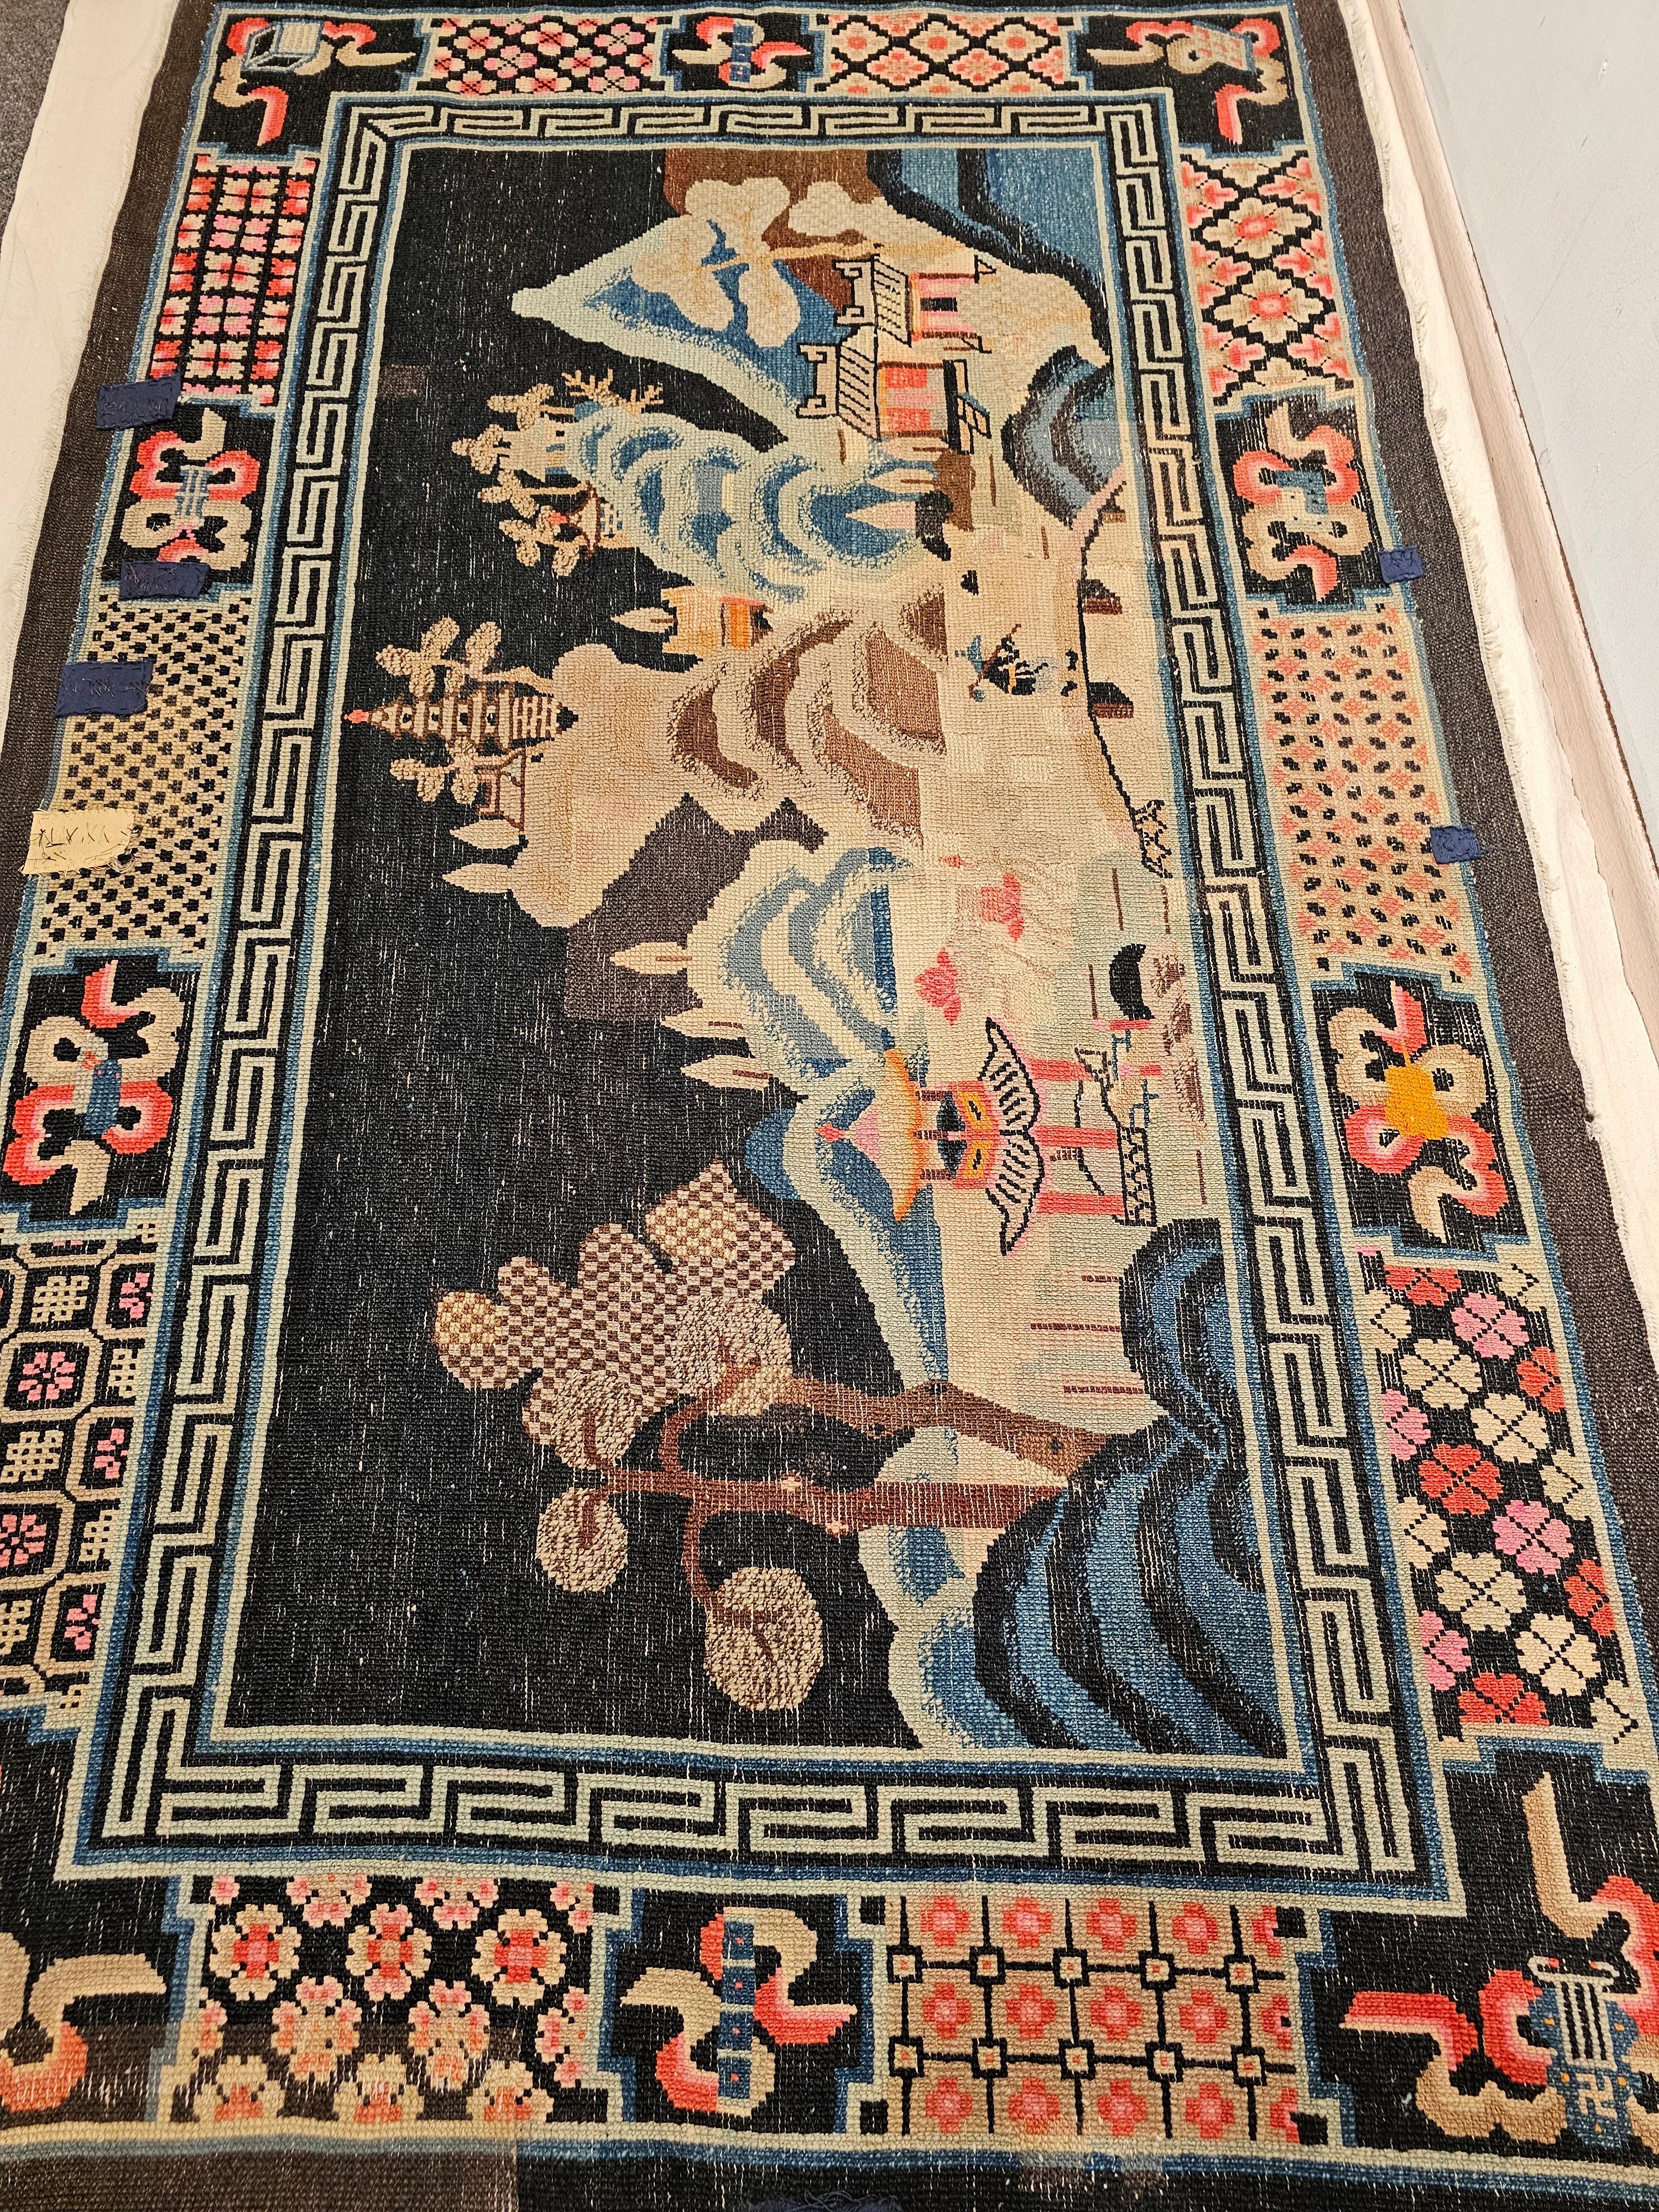 Late 1800s Ningxia Chinese Rug with A Pictorial Design of Forest, Mountains For Sale 9